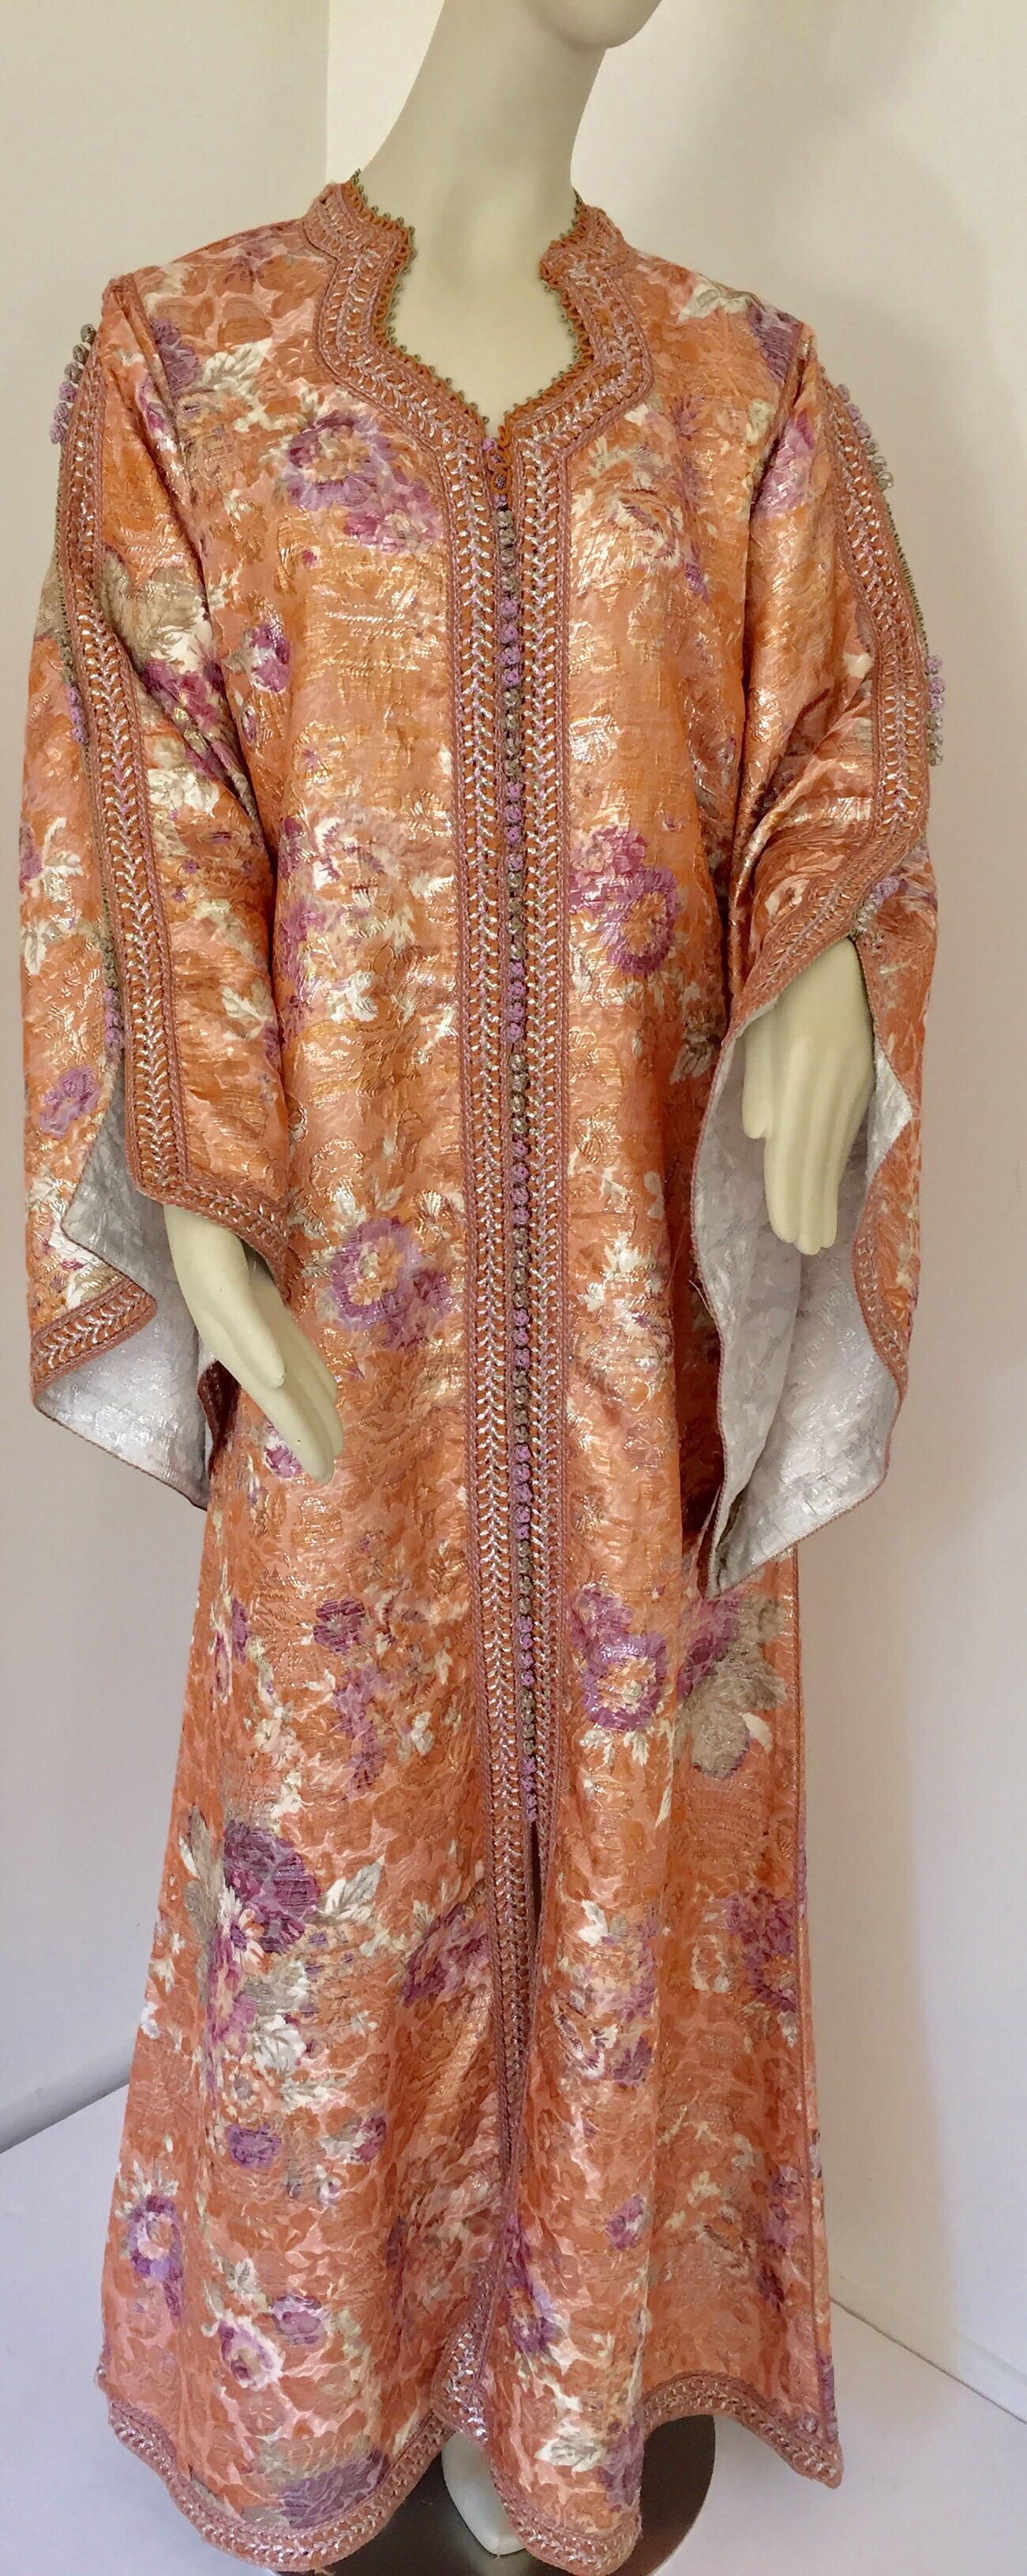 Moroccan Kaftan Orange and Purple Floral with Gold Embroidered Maxi Dress Caftan For Sale 3